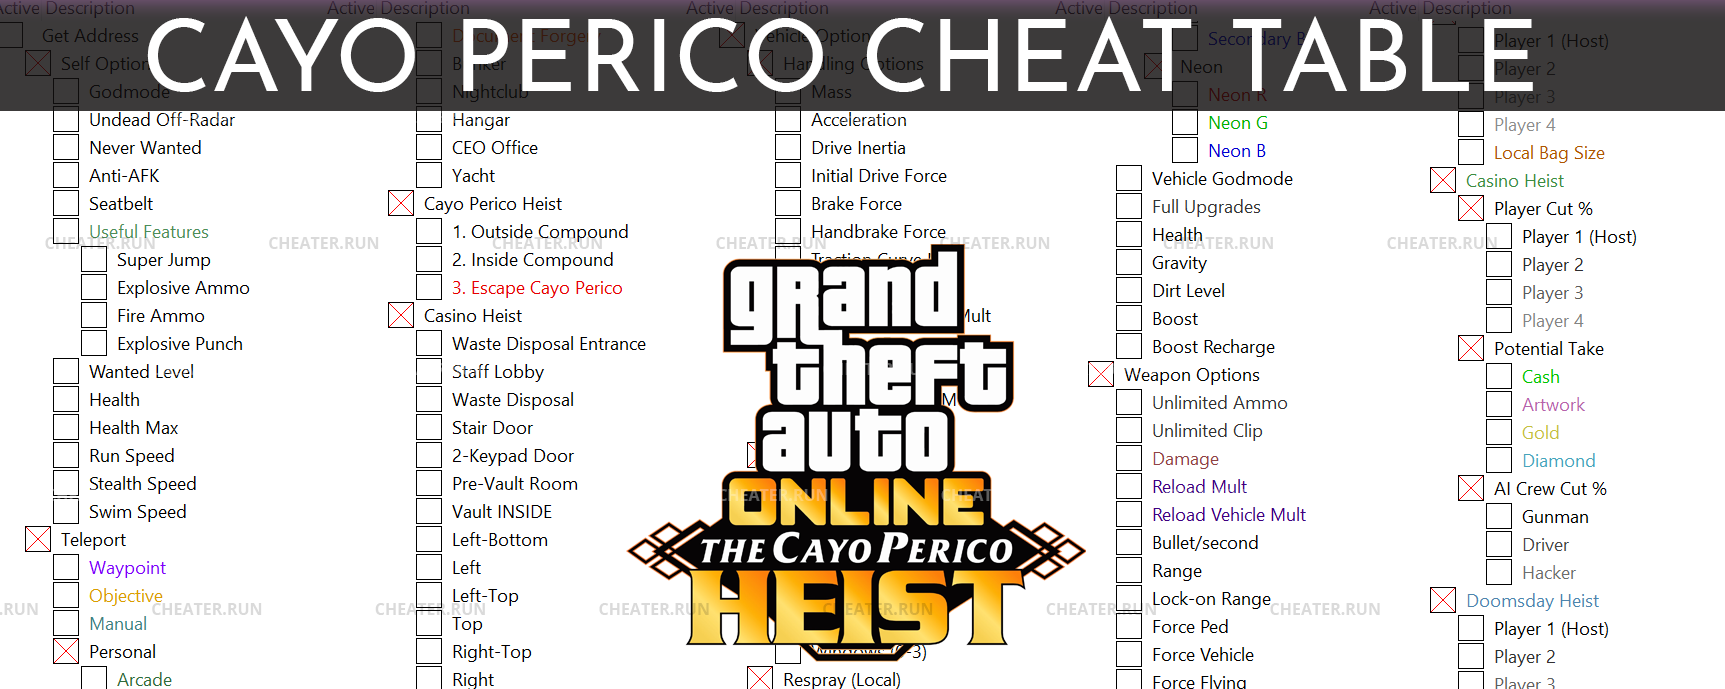 1609079708-cayo-perico-cheat-table.png